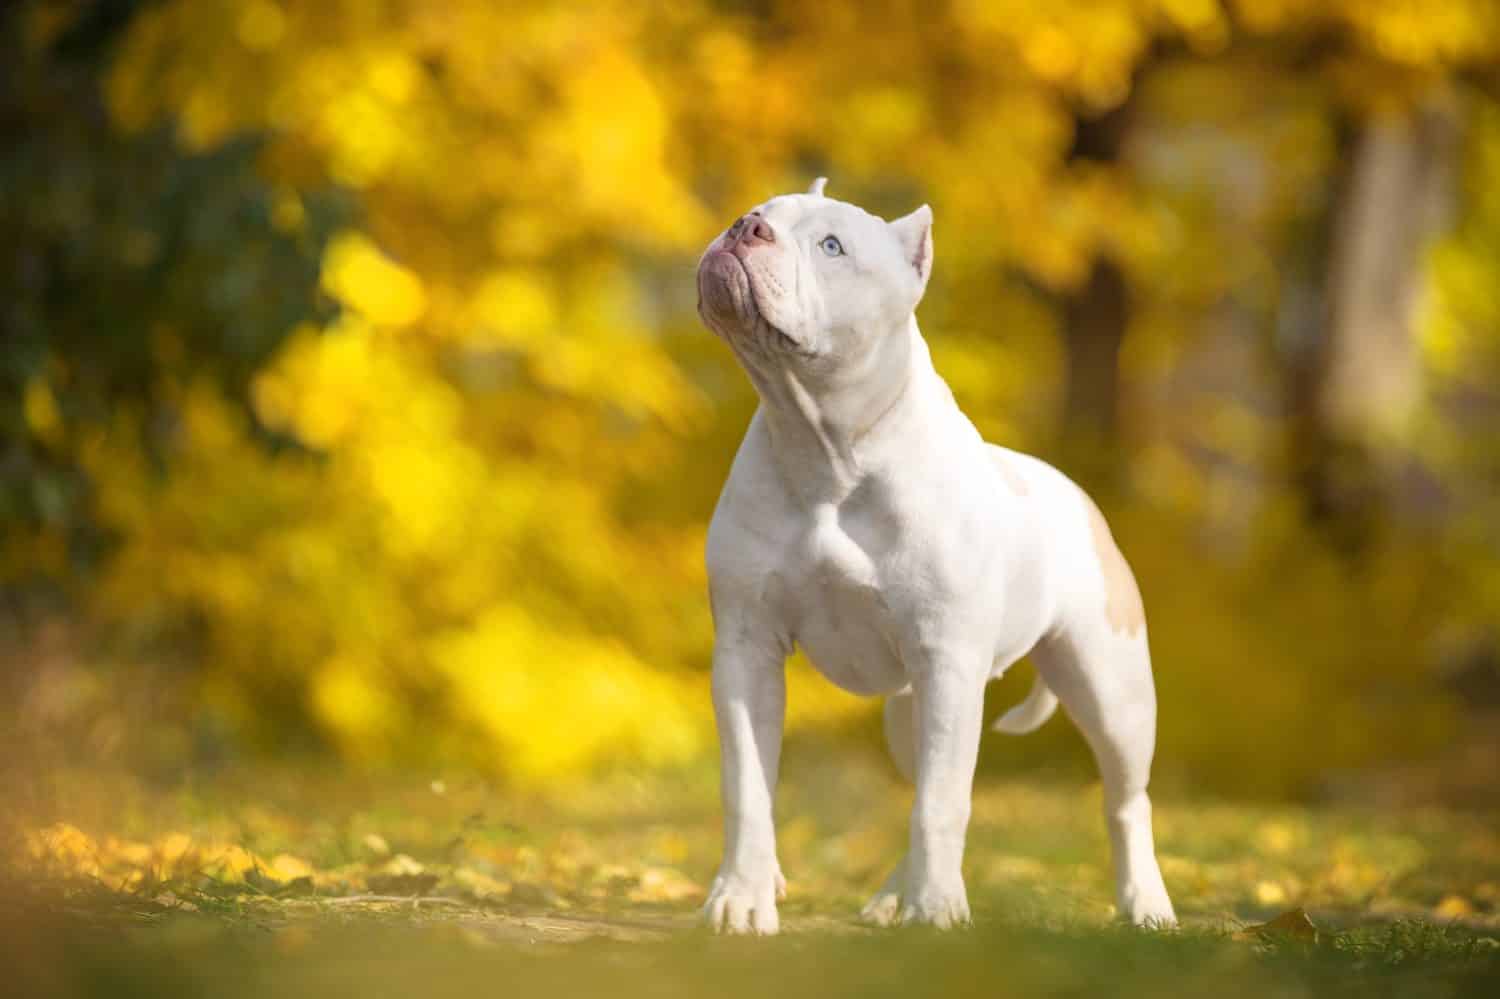 Funny white American bully dog stands and warily looks up, front view. Puppy obediently executes the command during training in beautiful autumn park with yellowed foliage, blurred background.